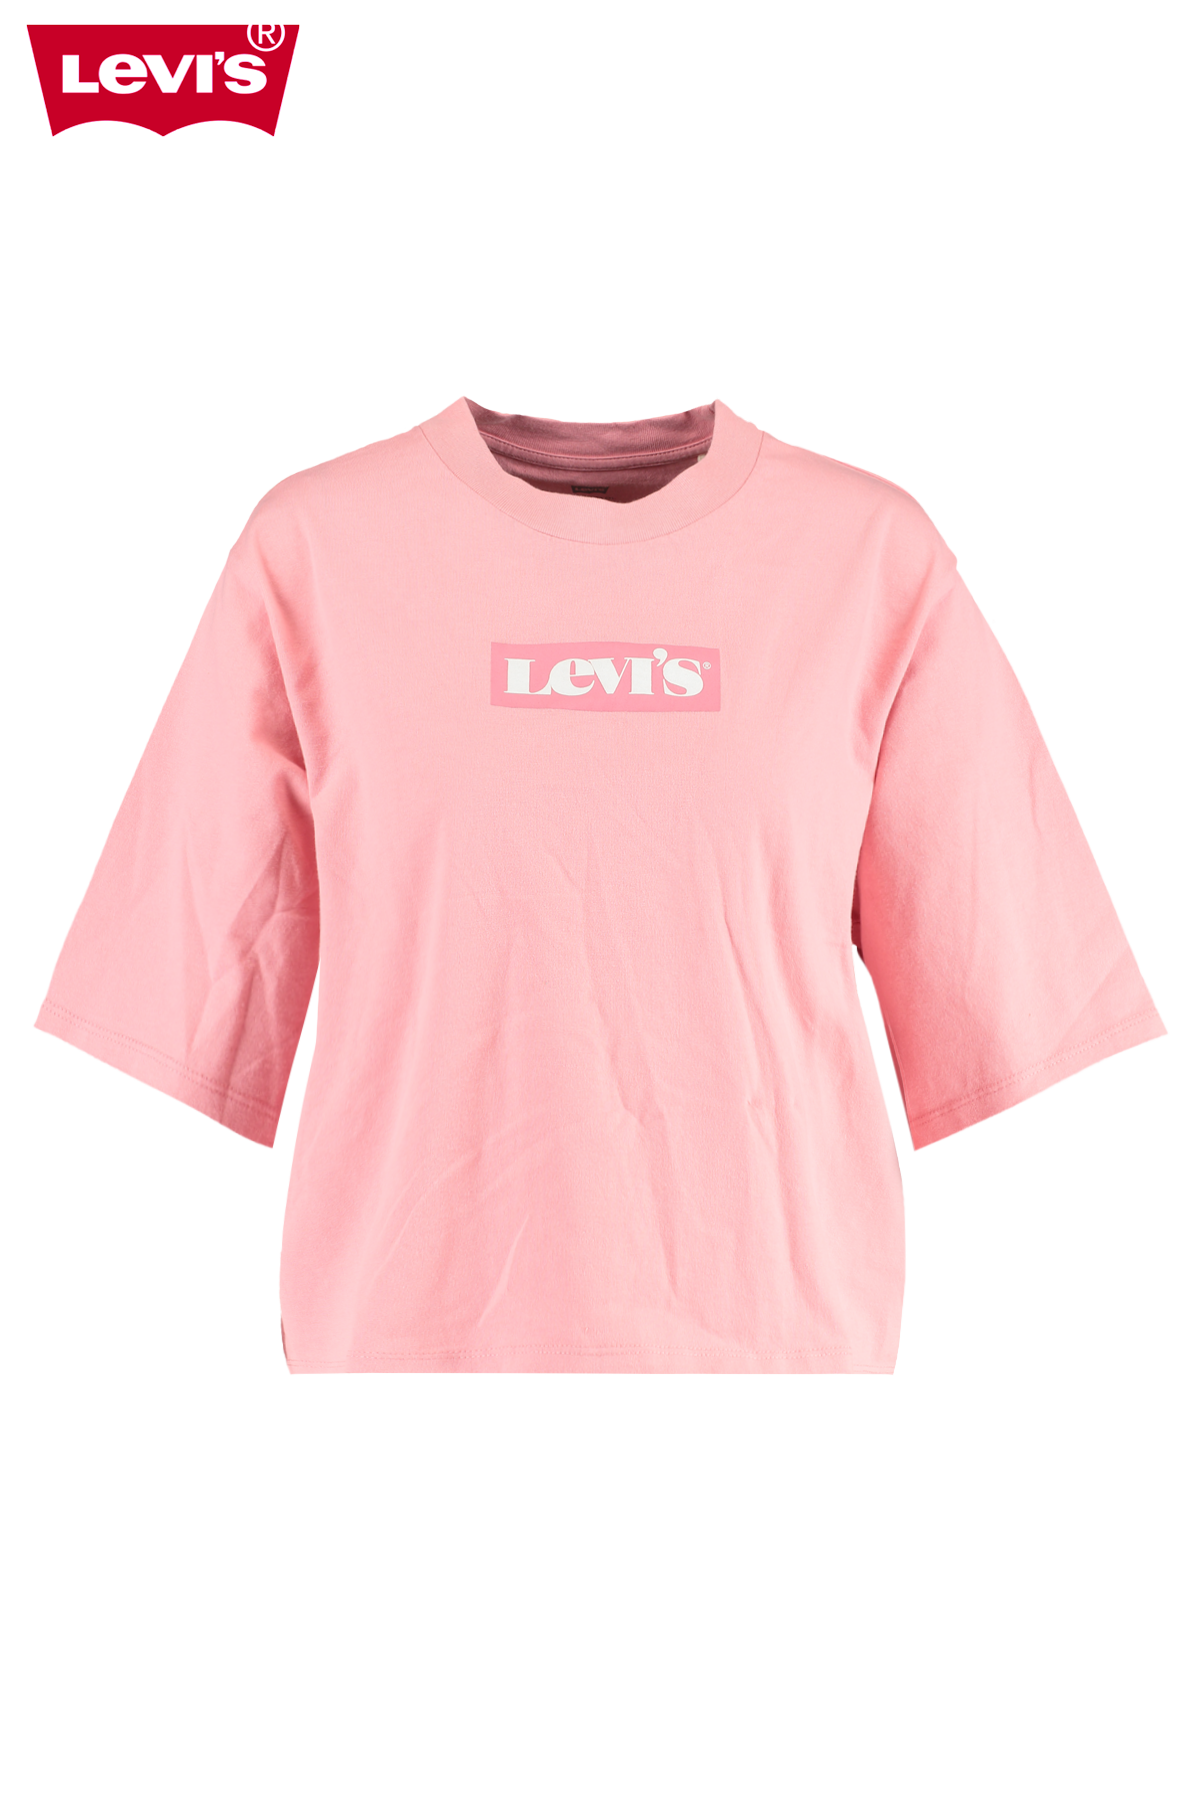 Women Levi's t-shirt Heavy weight right on tee Pink Buy Online